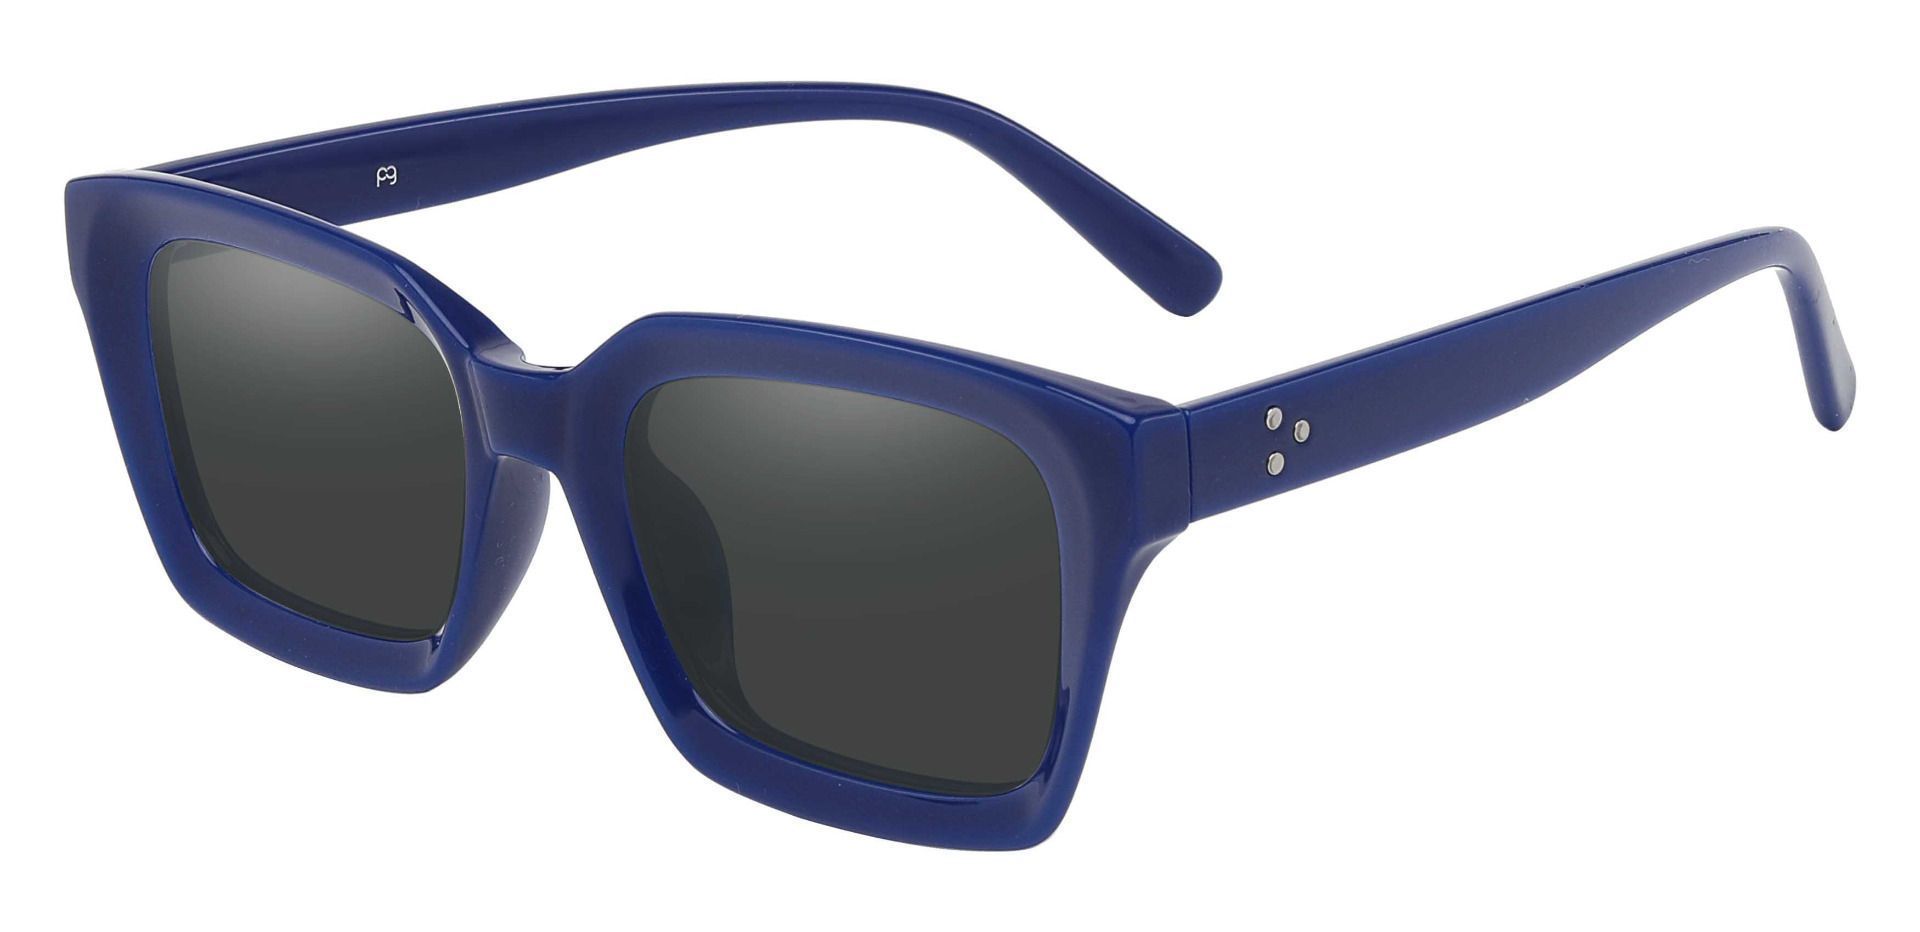 Unity Rectangle Non-Rx Sunglasses - Blue Frame With Gray Lenses